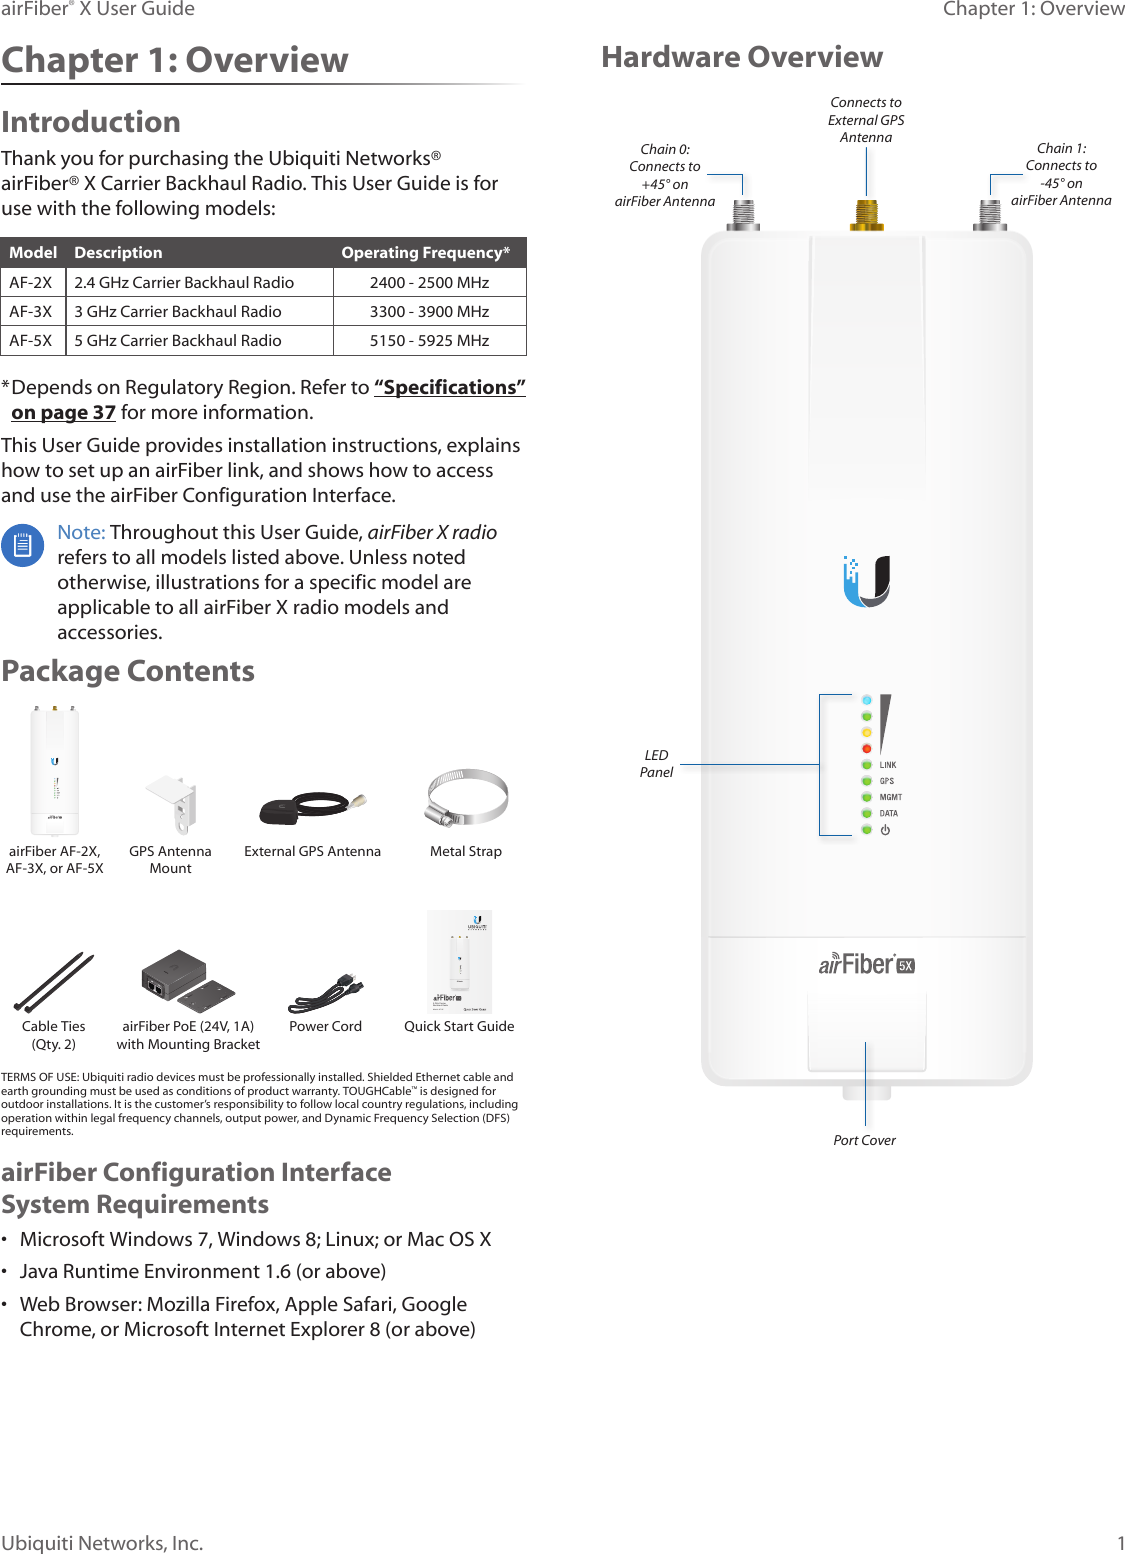 1Chapter 1: OverviewairFiber® X User GuideUbiquiti Networks, Inc.Hardware OverviewPort CoverLED PanelConnects to External GPS AntennaChain 0:  Connects to  +45° on  airFiber AntennaChain 1:  Connects to   -45° on airFiber AntennaChapter 1: OverviewIntroductionThank you for purchasing the Ubiquiti Networks®  airFiber® X Carrier Backhaul Radio. This User Guide is for use with the following models:Model Description Operating Frequency*AF-2X 2.4 GHz Carrier Backhaul Radio 2400 - 2500 MHzAF-3X 3 GHz Carrier Backhaul Radio 3300 - 3900 MHzAF-5X 5 GHz Carrier Backhaul Radio 5150 - 5925 MHz* Depends on Regulatory Region. Refer to “Specifications” on page 37 for more information.This User Guide provides installation instructions, explains how to set up an airFiber link, and shows how to access and use the airFiber Configuration Interface. Note: Throughout this User Guide, airFiberX radio refers to all models listed above. Unless noted otherwise, illustrations for a specific model are applicable to all airFiberX radio models and accessories.Package ContentsairFiber AF-2X, AF-3X, or AF-5XGPS Antenna  Mount External GPS Antenna Metal Strap5 GHz Carrier Backhaul RadioModel: AF-5XDATAMGMTGPSLINKDATAMGMTGPSLINKCable Ties (Qty. 2)airFiber PoE (24V, 1A) with Mounting BracketPower Cord Quick Start GuideTERMS OF USE: Ubiquiti radio devices must be professionally installed. Shielded Ethernet cable and earth grounding must be used as conditions of product warranty. TOUGHCable™ is designed for outdoor installations. It is the customer’s responsibility to follow local country regulations, including operation within legal frequency channels, output power, and Dynamic Frequency Selection (DFS) requirements.airFiber Configuration Interface SystemRequirements•  Microsoft Windows 7, Windows 8; Linux; or Mac OS X•  Java Runtime Environment 1.6 (or above)•  Web Browser: Mozilla Firefox, Apple Safari, Google Chrome, or Microsoft Internet Explorer 8 (or above)